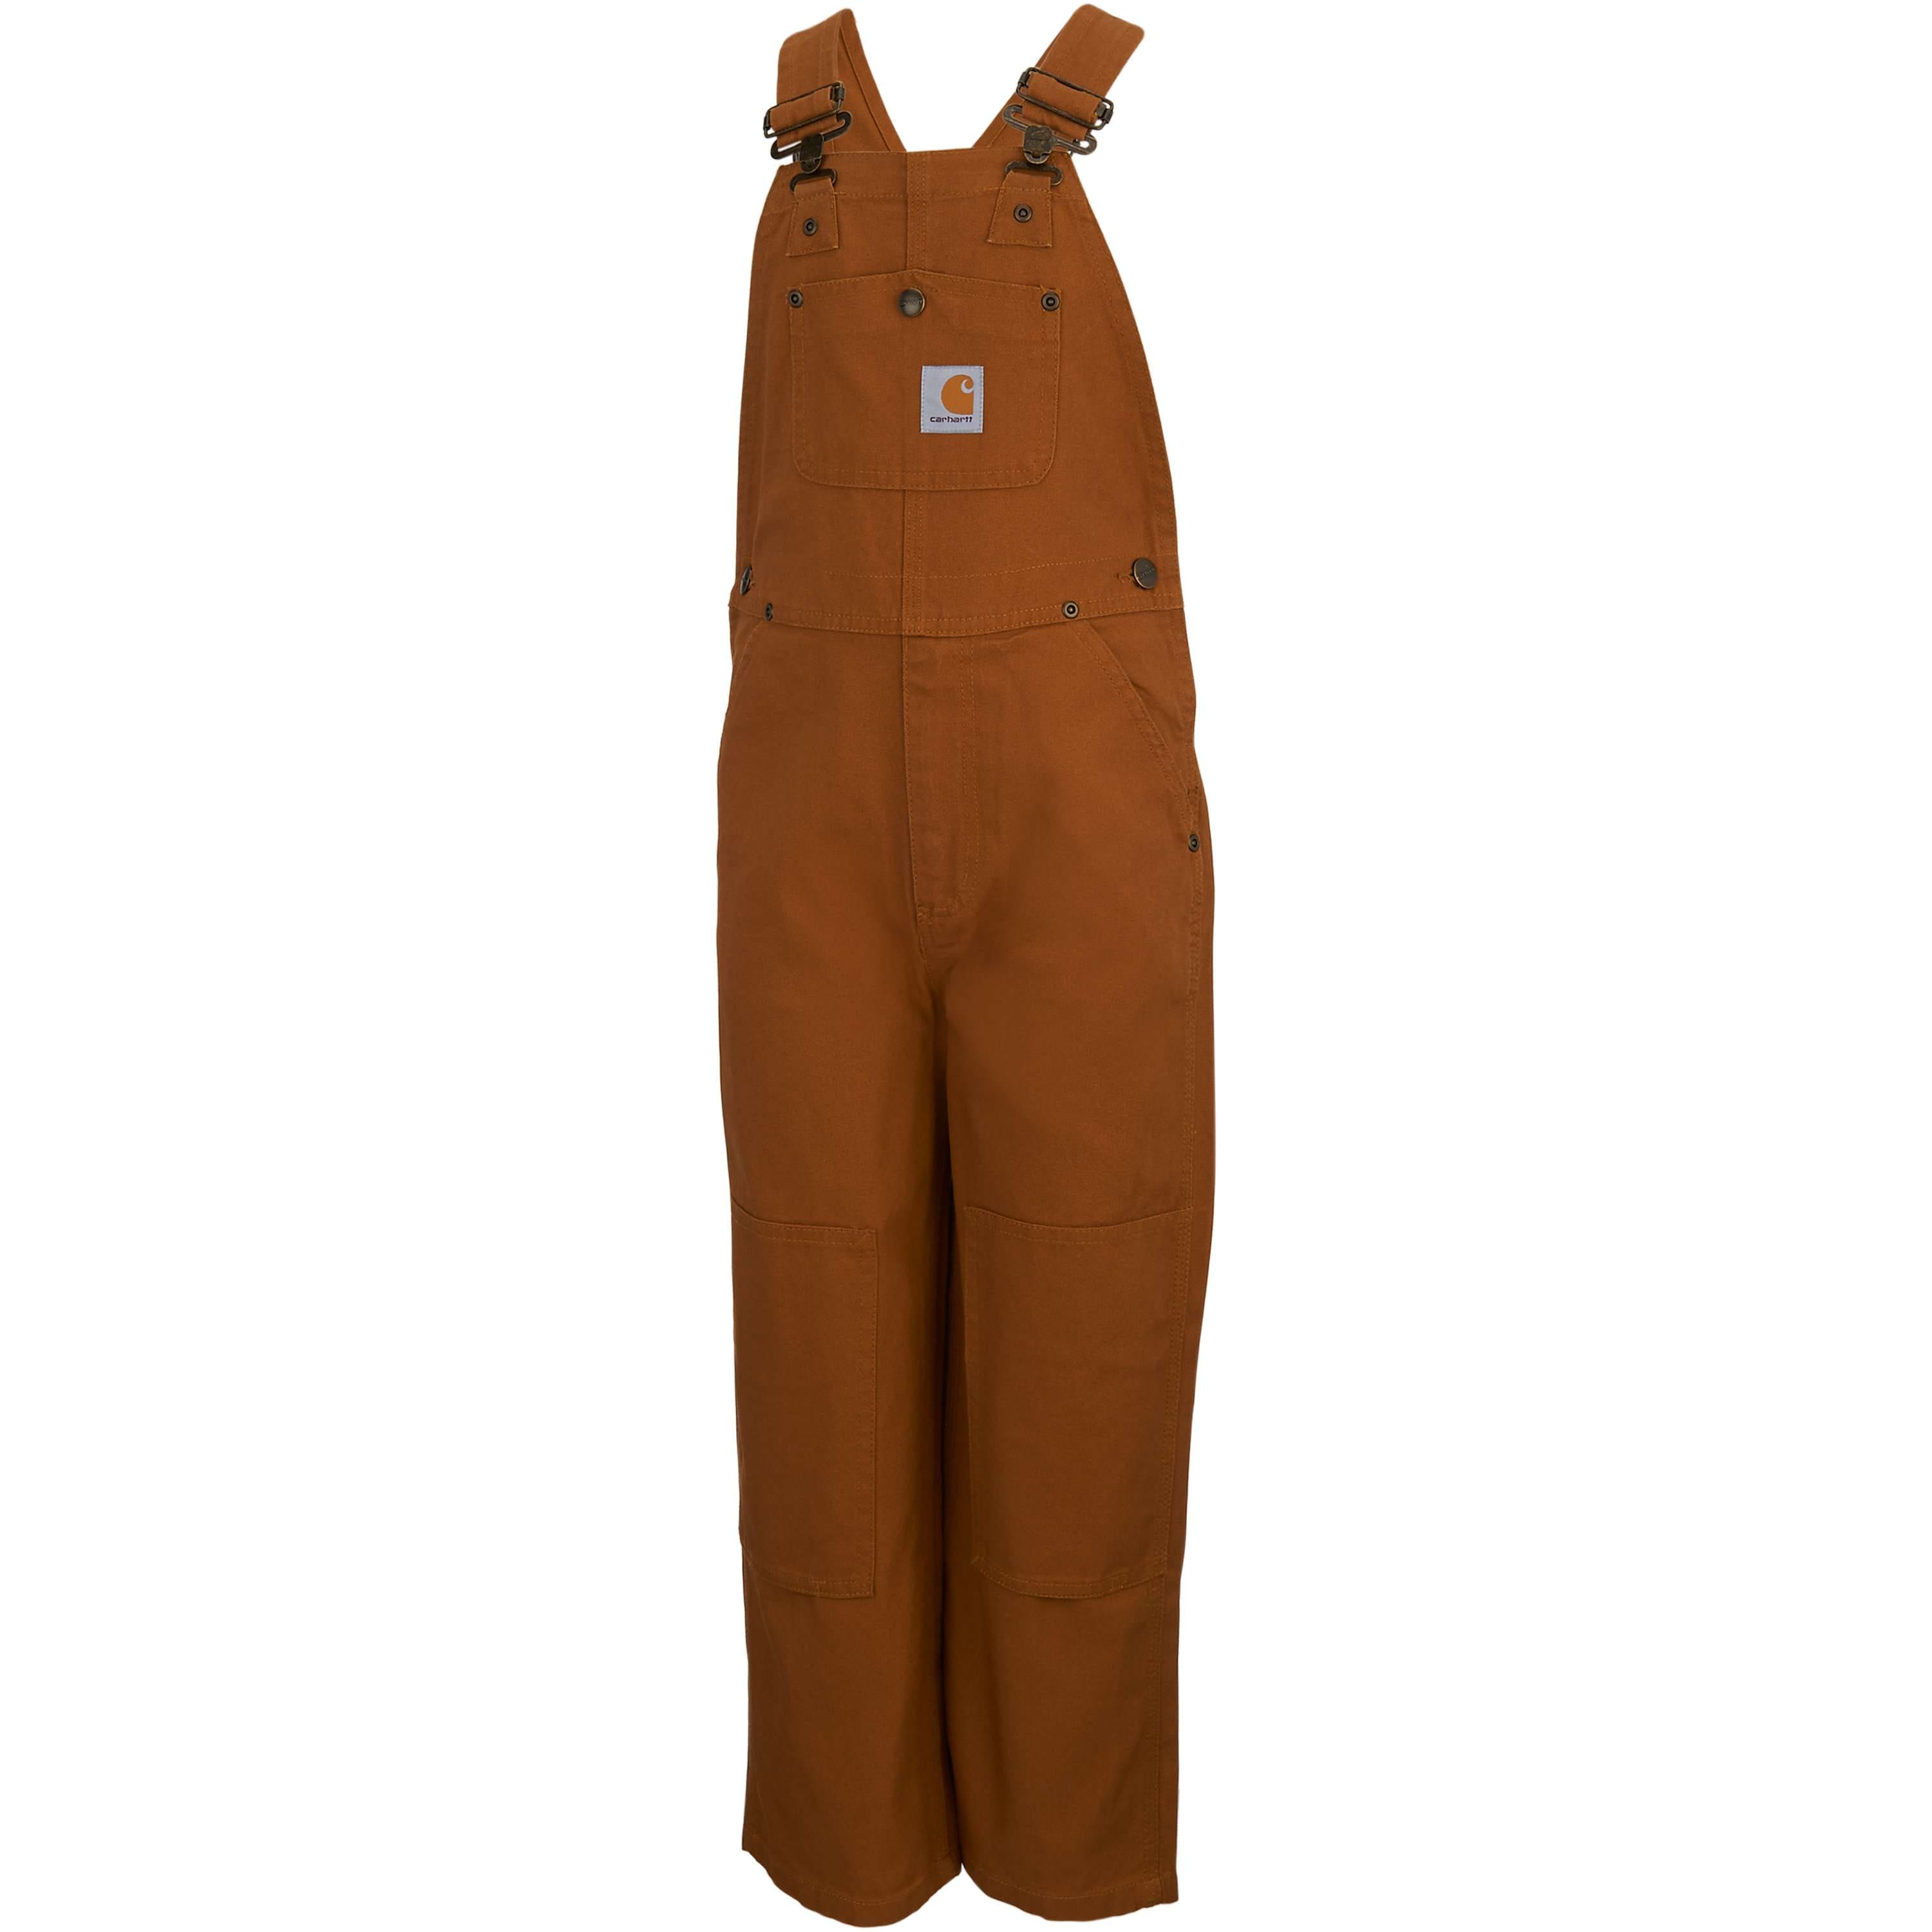 Boys' Duck Washed Bib Overall Sizes 4-7 